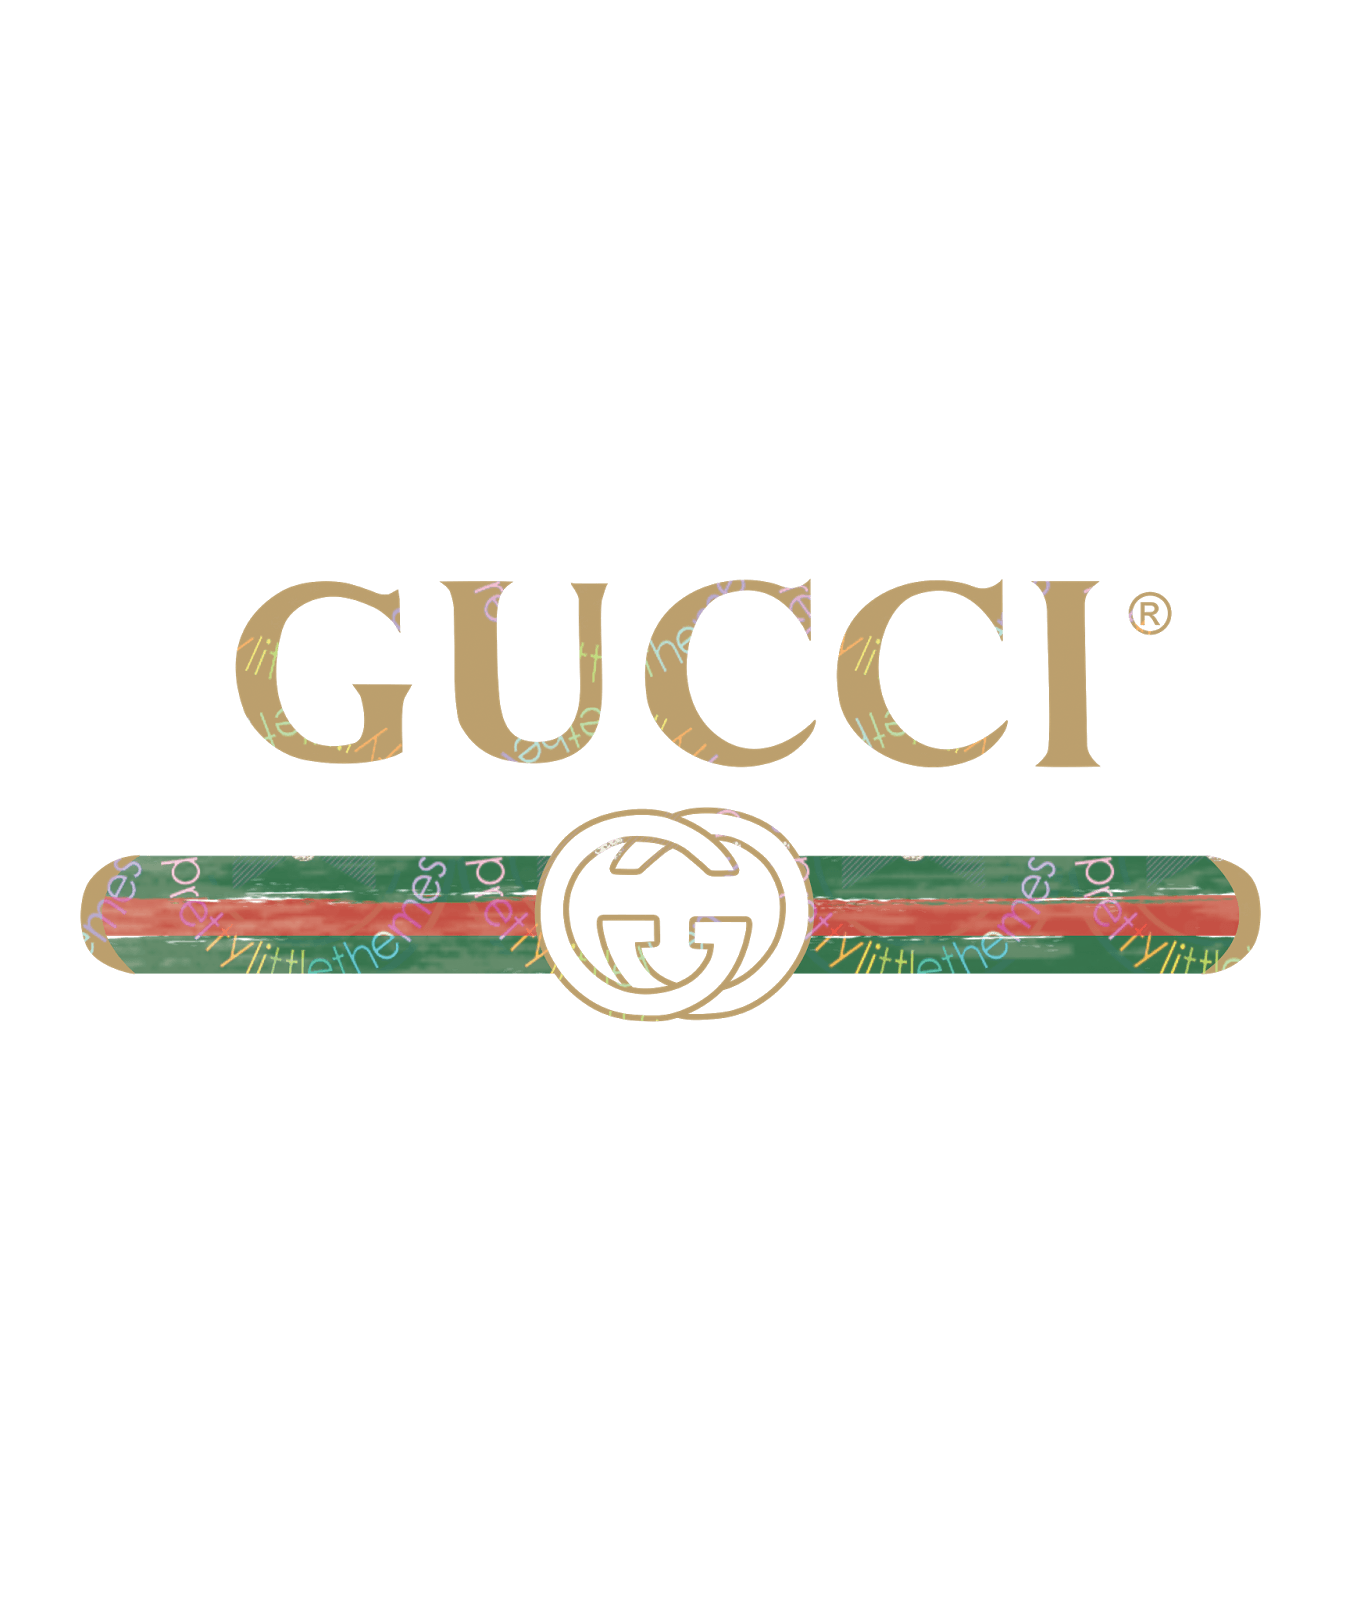 Vintage Gucci Logo - Pretty little themes: Vintage Gucci Inspired Logo Vector png